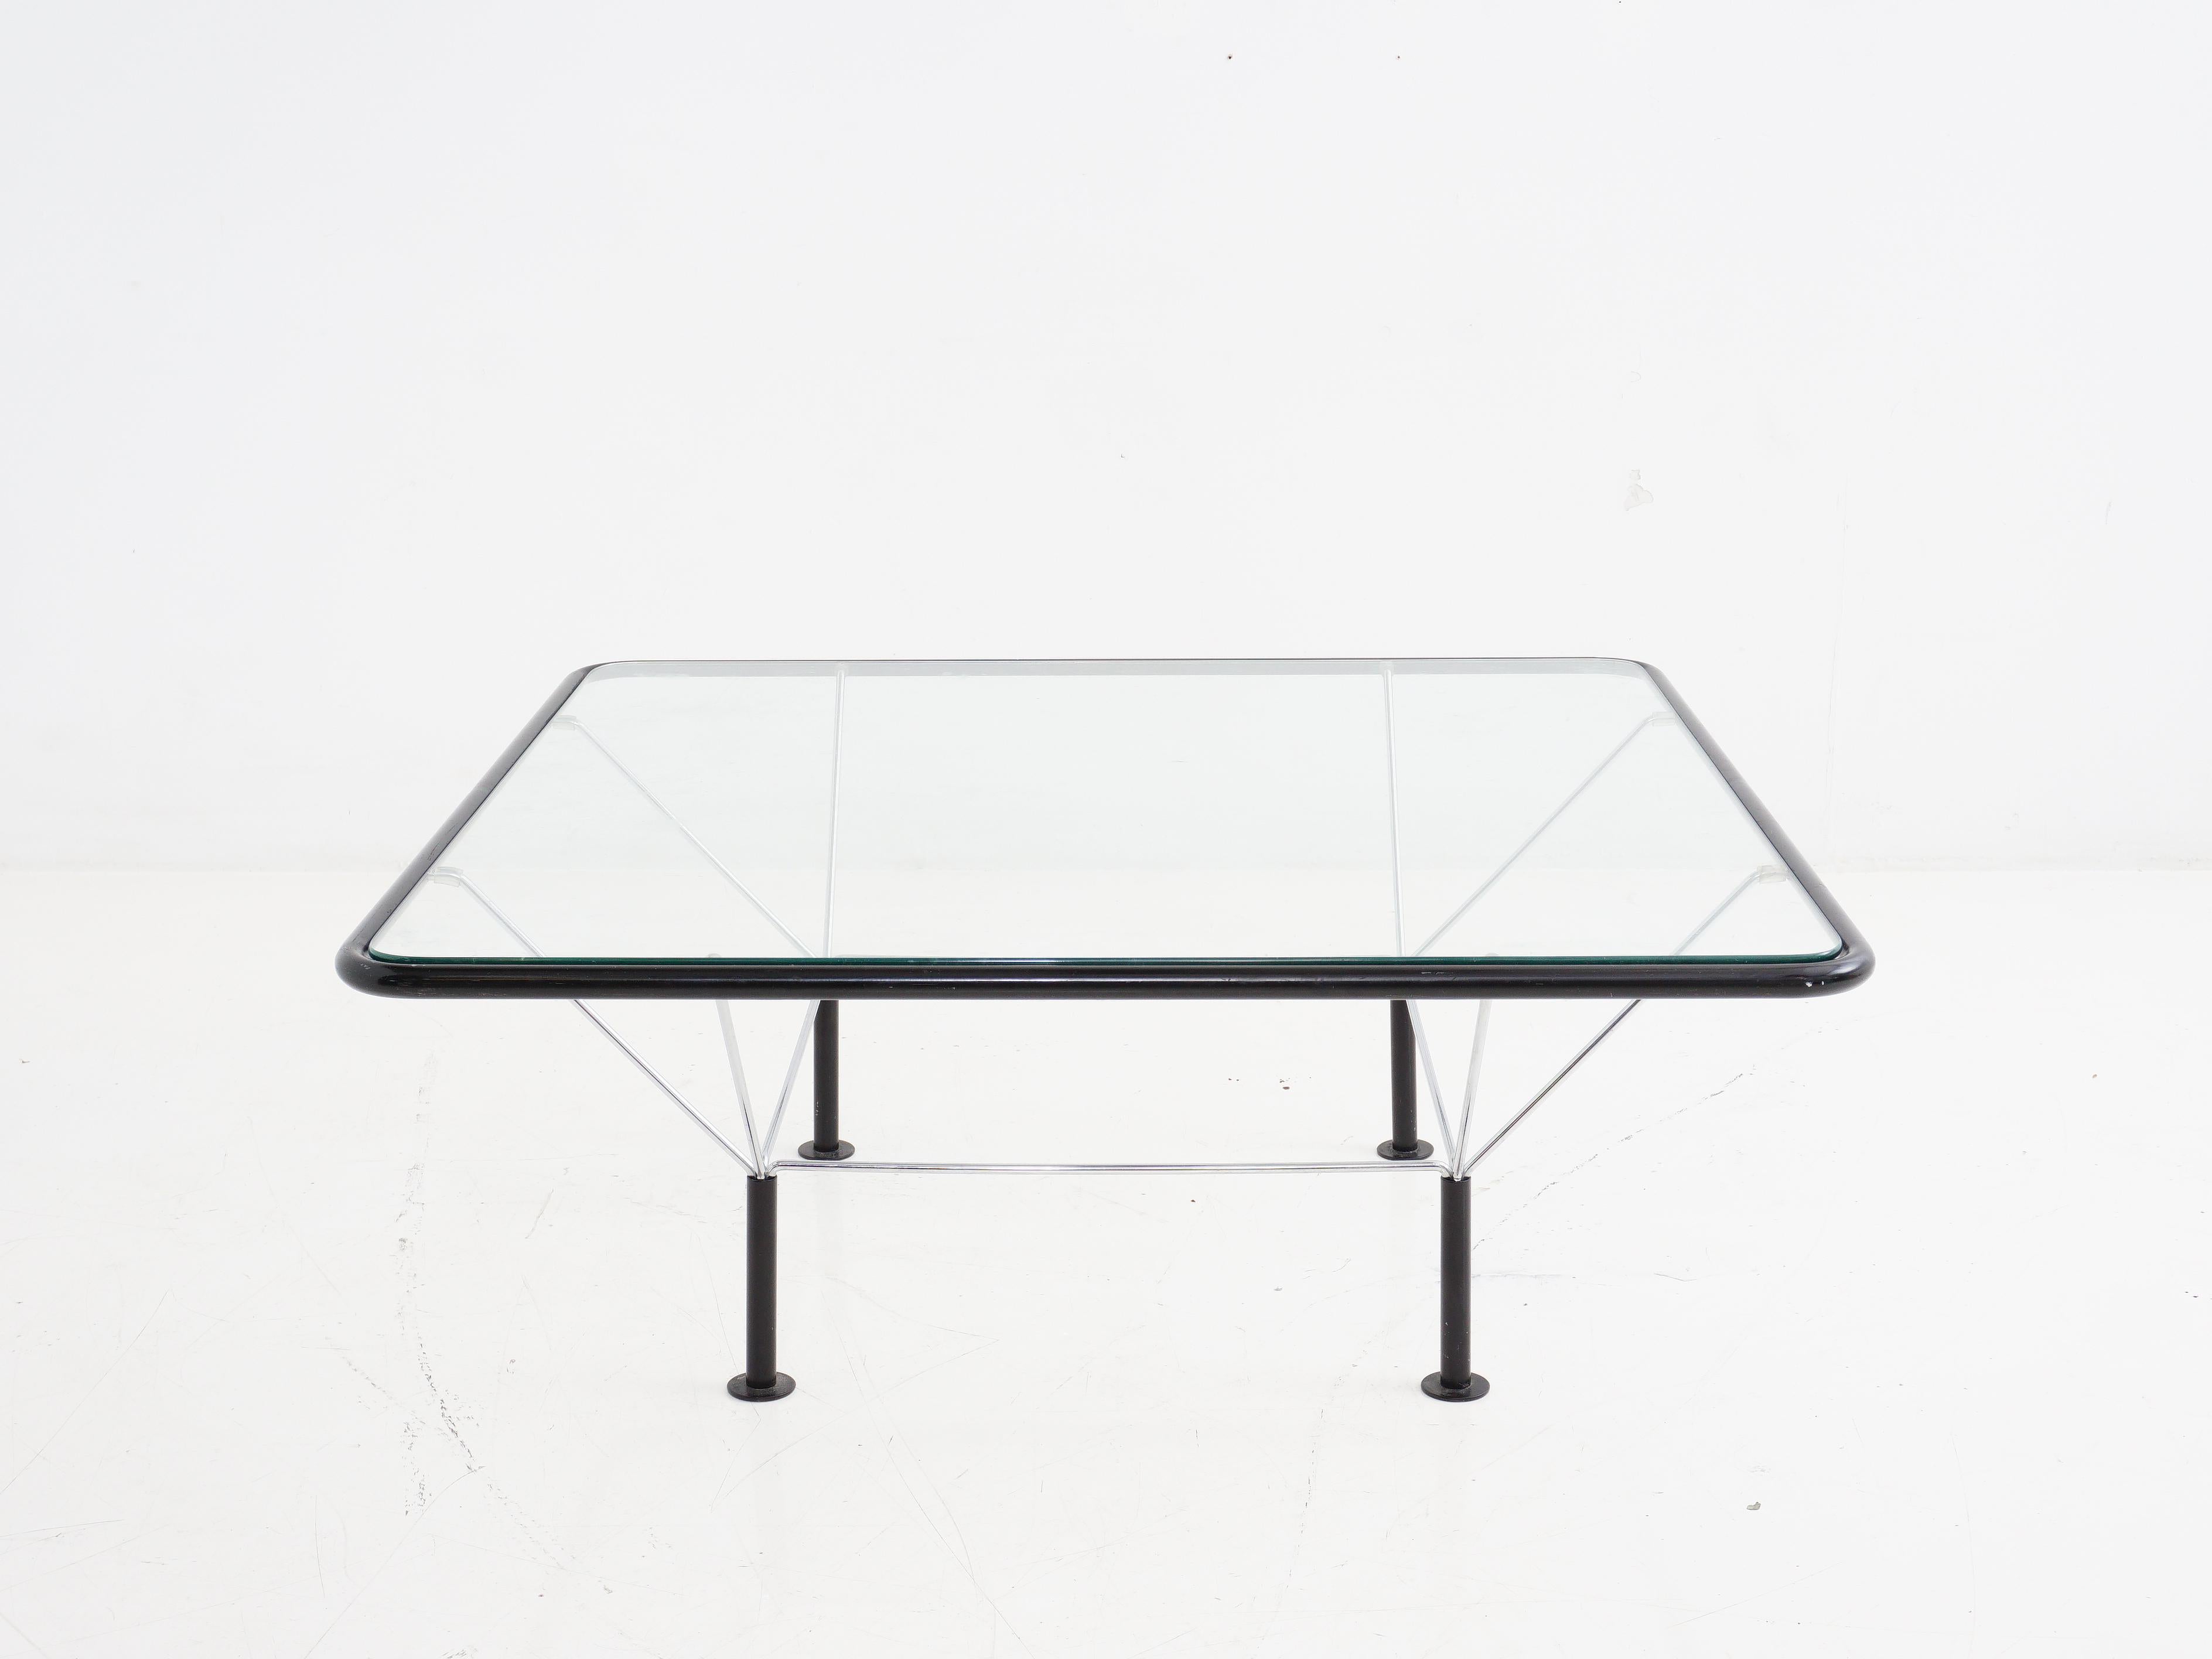 The 1970s Danish-designed coffee table by Niels Bendtsen is a testament to elegant simplicity. Featuring a square glass top, it effortlessly marries form and function, making it a timeless centerpiece for any current living space. Its clean lines